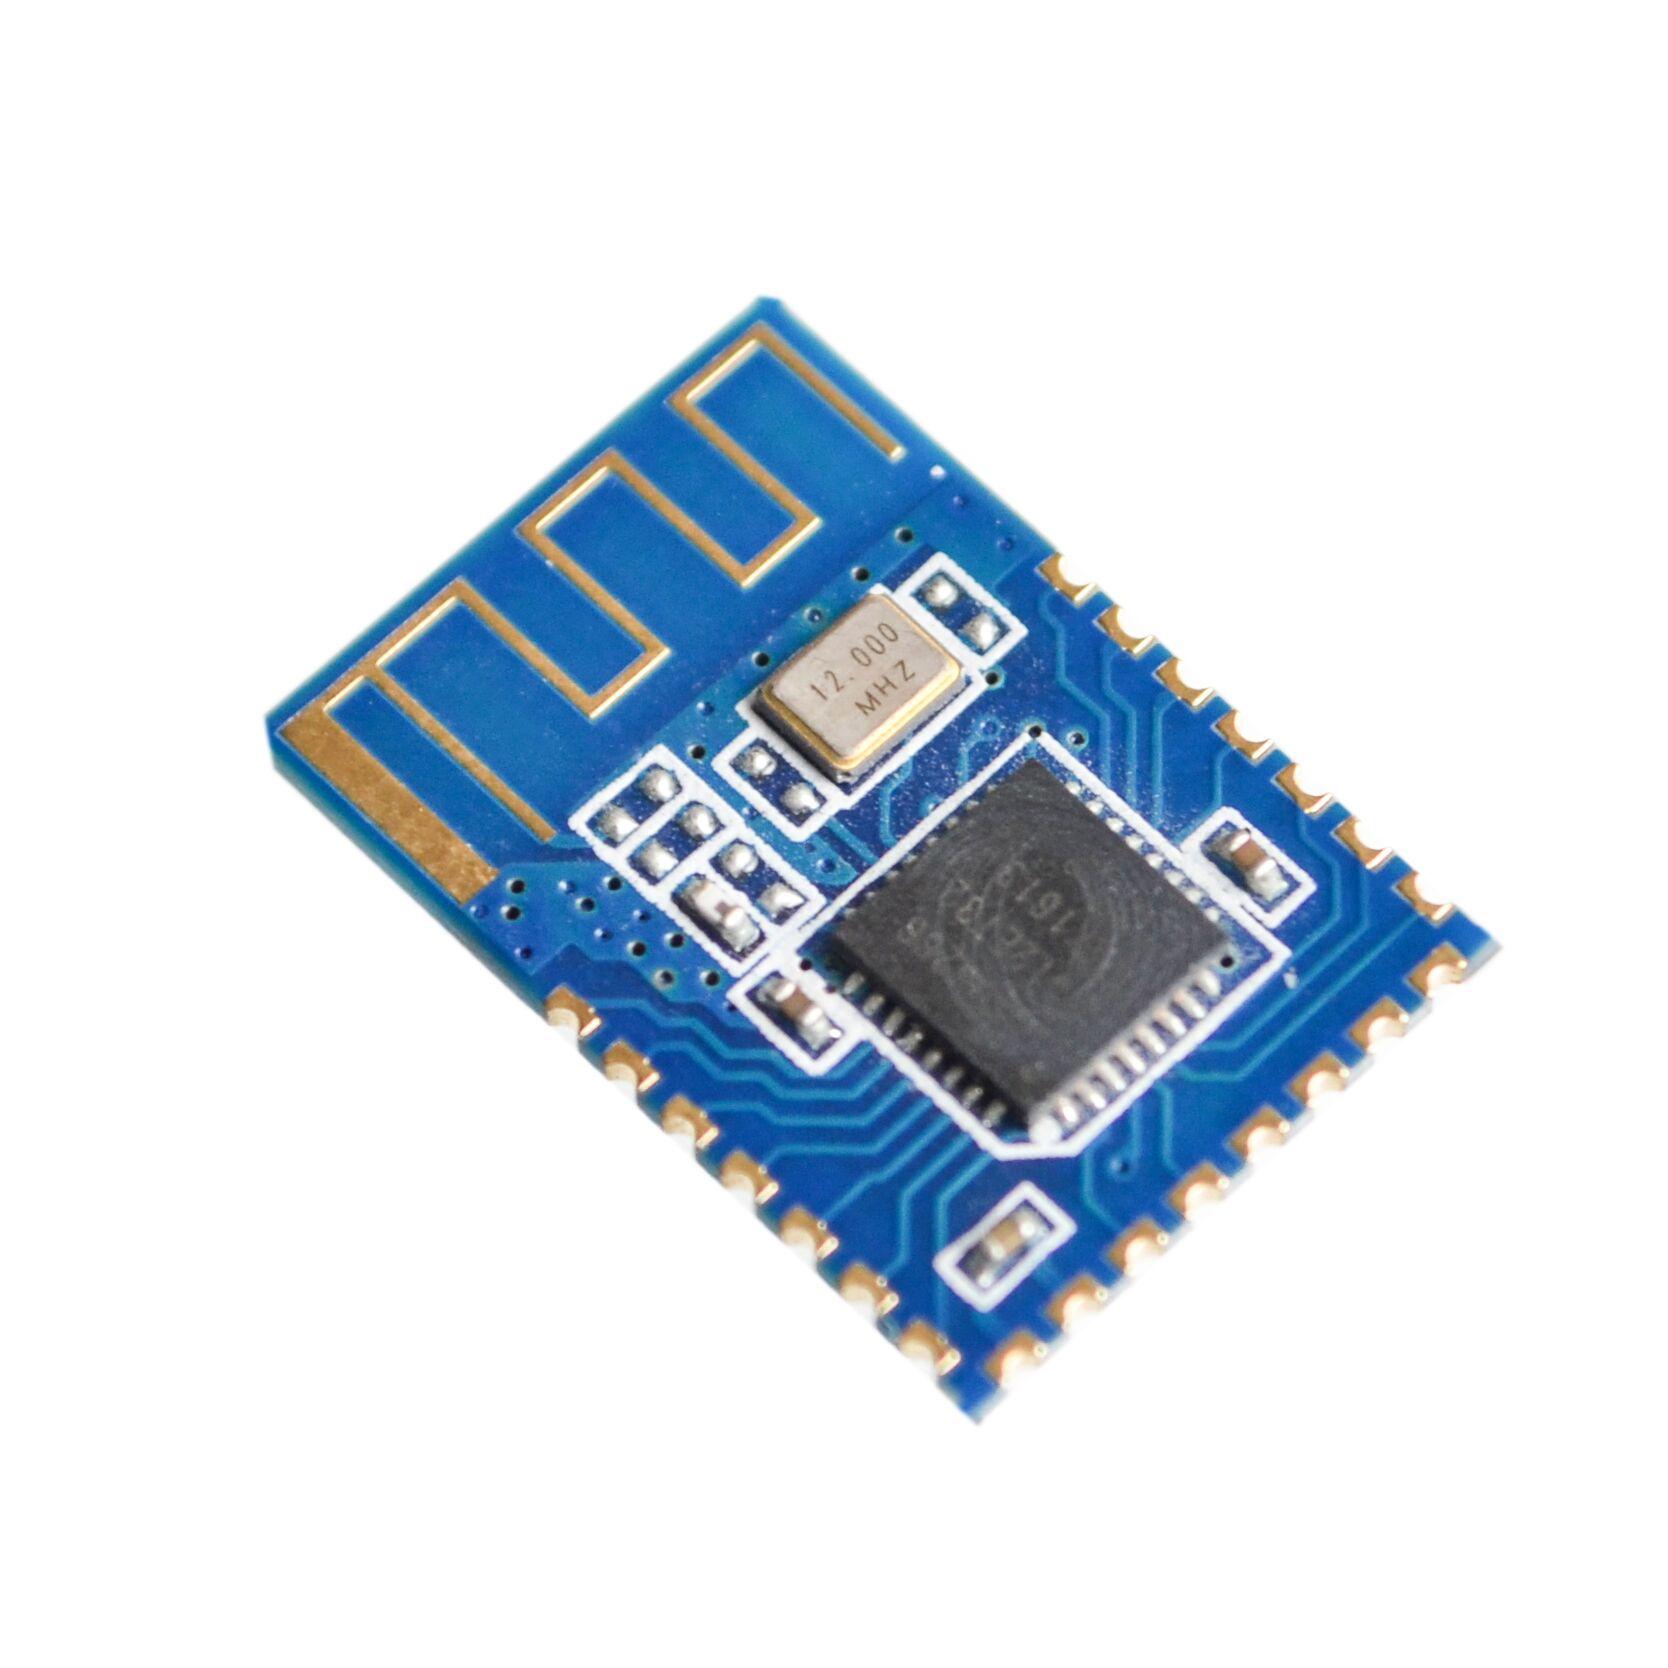 JDY-10 BLE Bluetooth 4.0 Uart Transceiver Module CC2541 Central Switching Wireless Module iBeacon